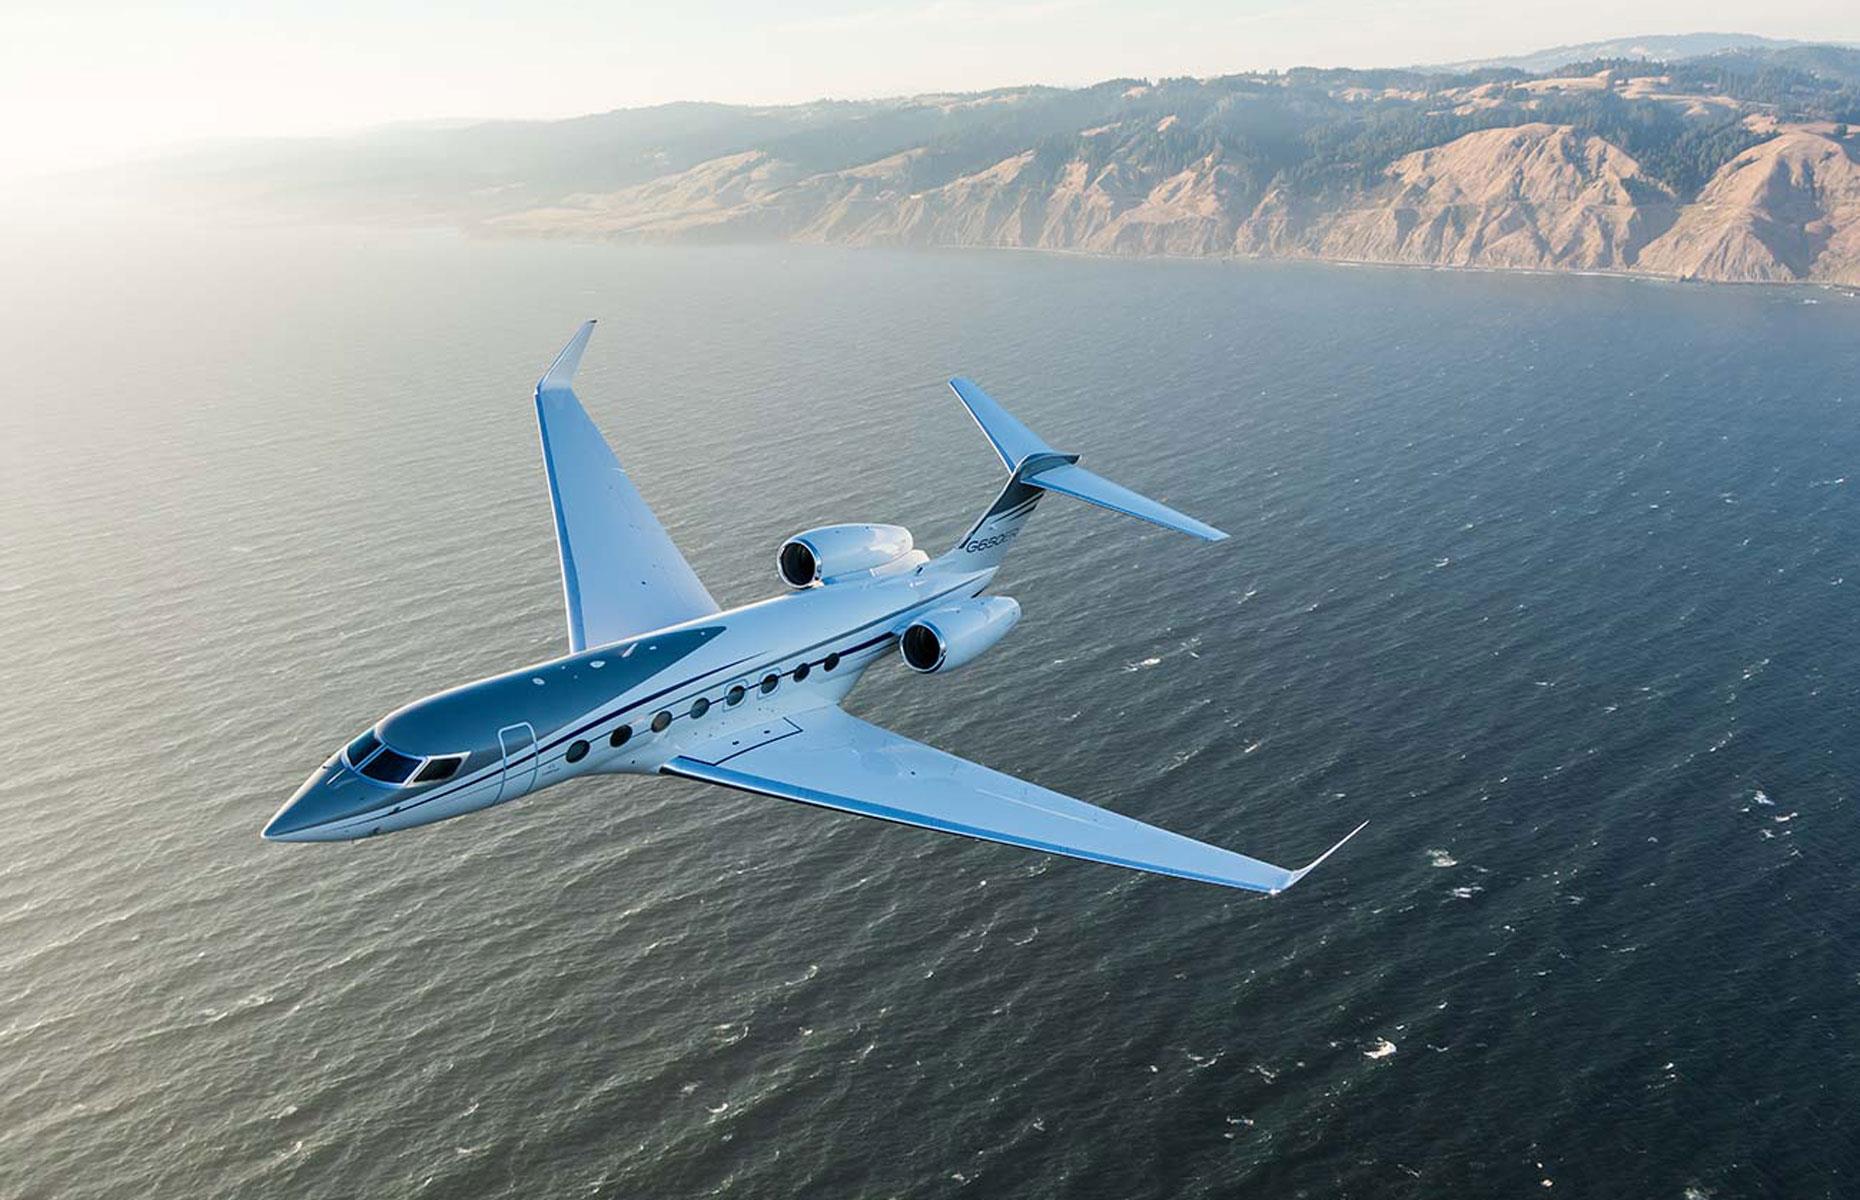 <p>Jeff Bezos is the proud owner of not just one but two Gulfstream G650ER private jets. The first was delivered in 2015 while the second was snapped up in 2019. Together the planes are worth up to $150 million (£115m), small change for one of the world's wealthiest people. Other billionaire Gulfstream G650ER owners include the aforementioned Larry Ellison and Bill Gates, as well as Elon Musk and British retail tycoon Sir Philip Green.</p>